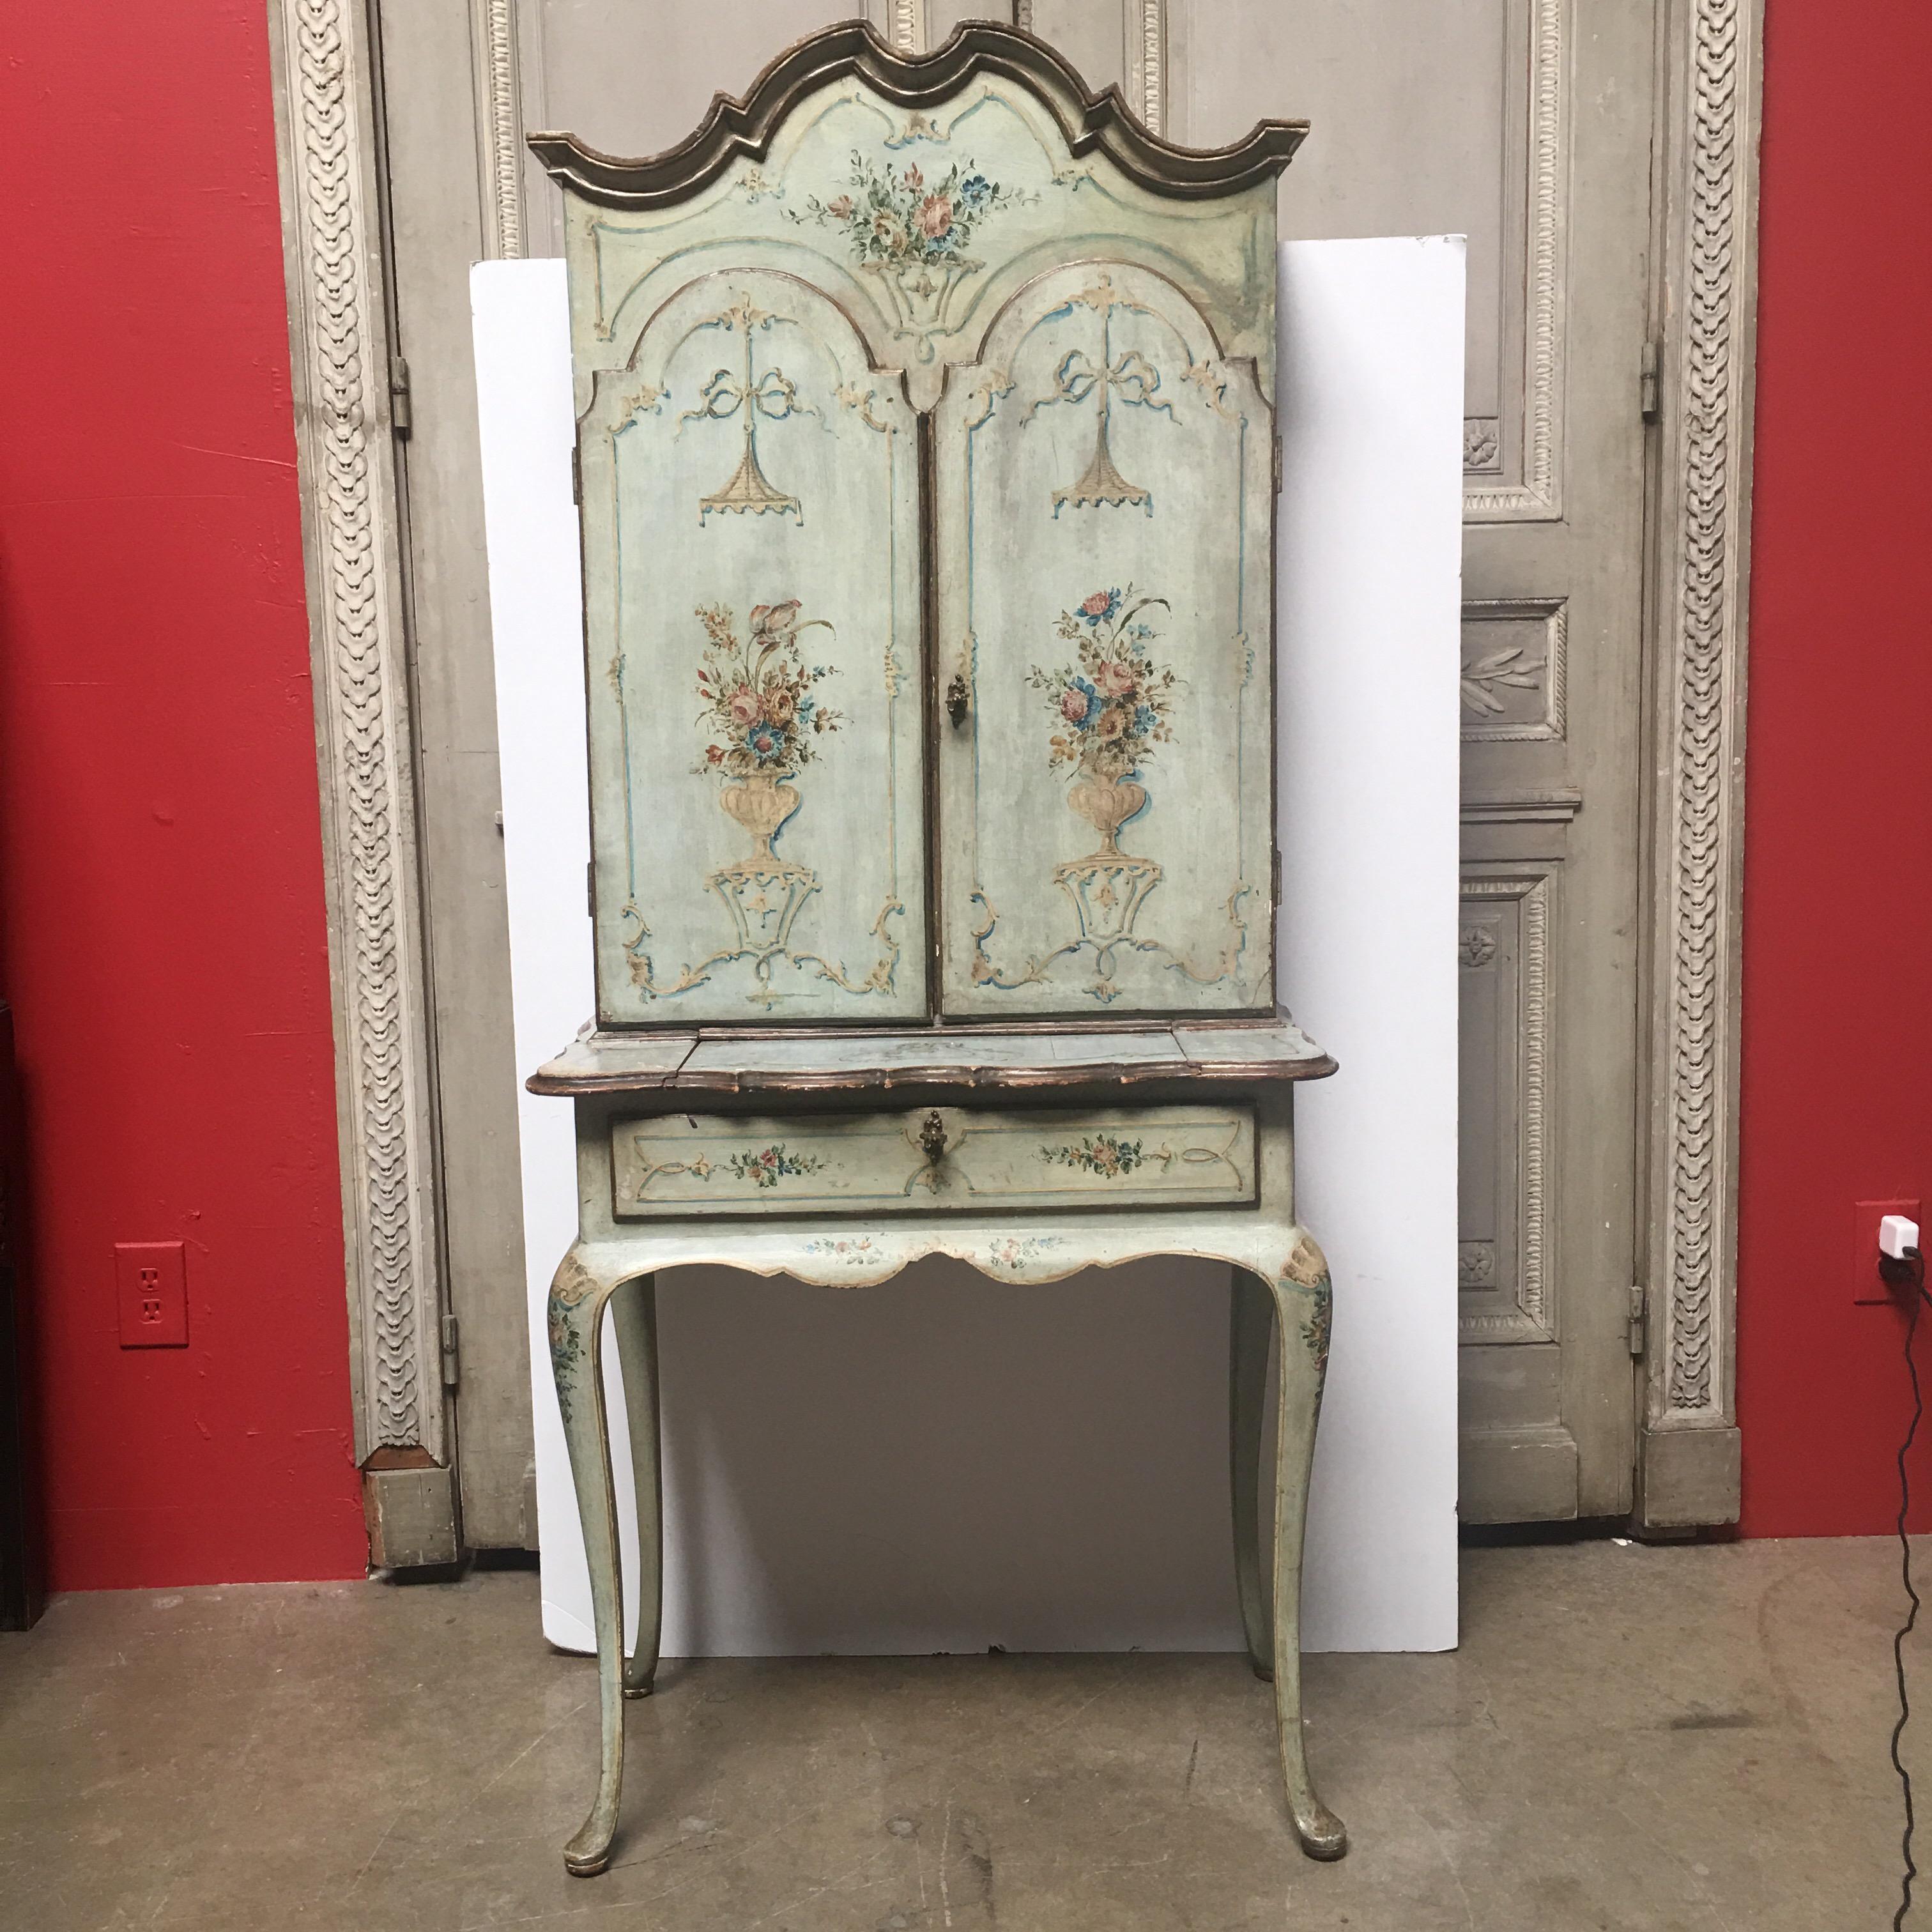 A late 19th century Italian painted secretary in a powder celadon blue green.  This small scale two piece secretary is painted in a beautiful chinoiserie style depicting classical scenes and flowers. 